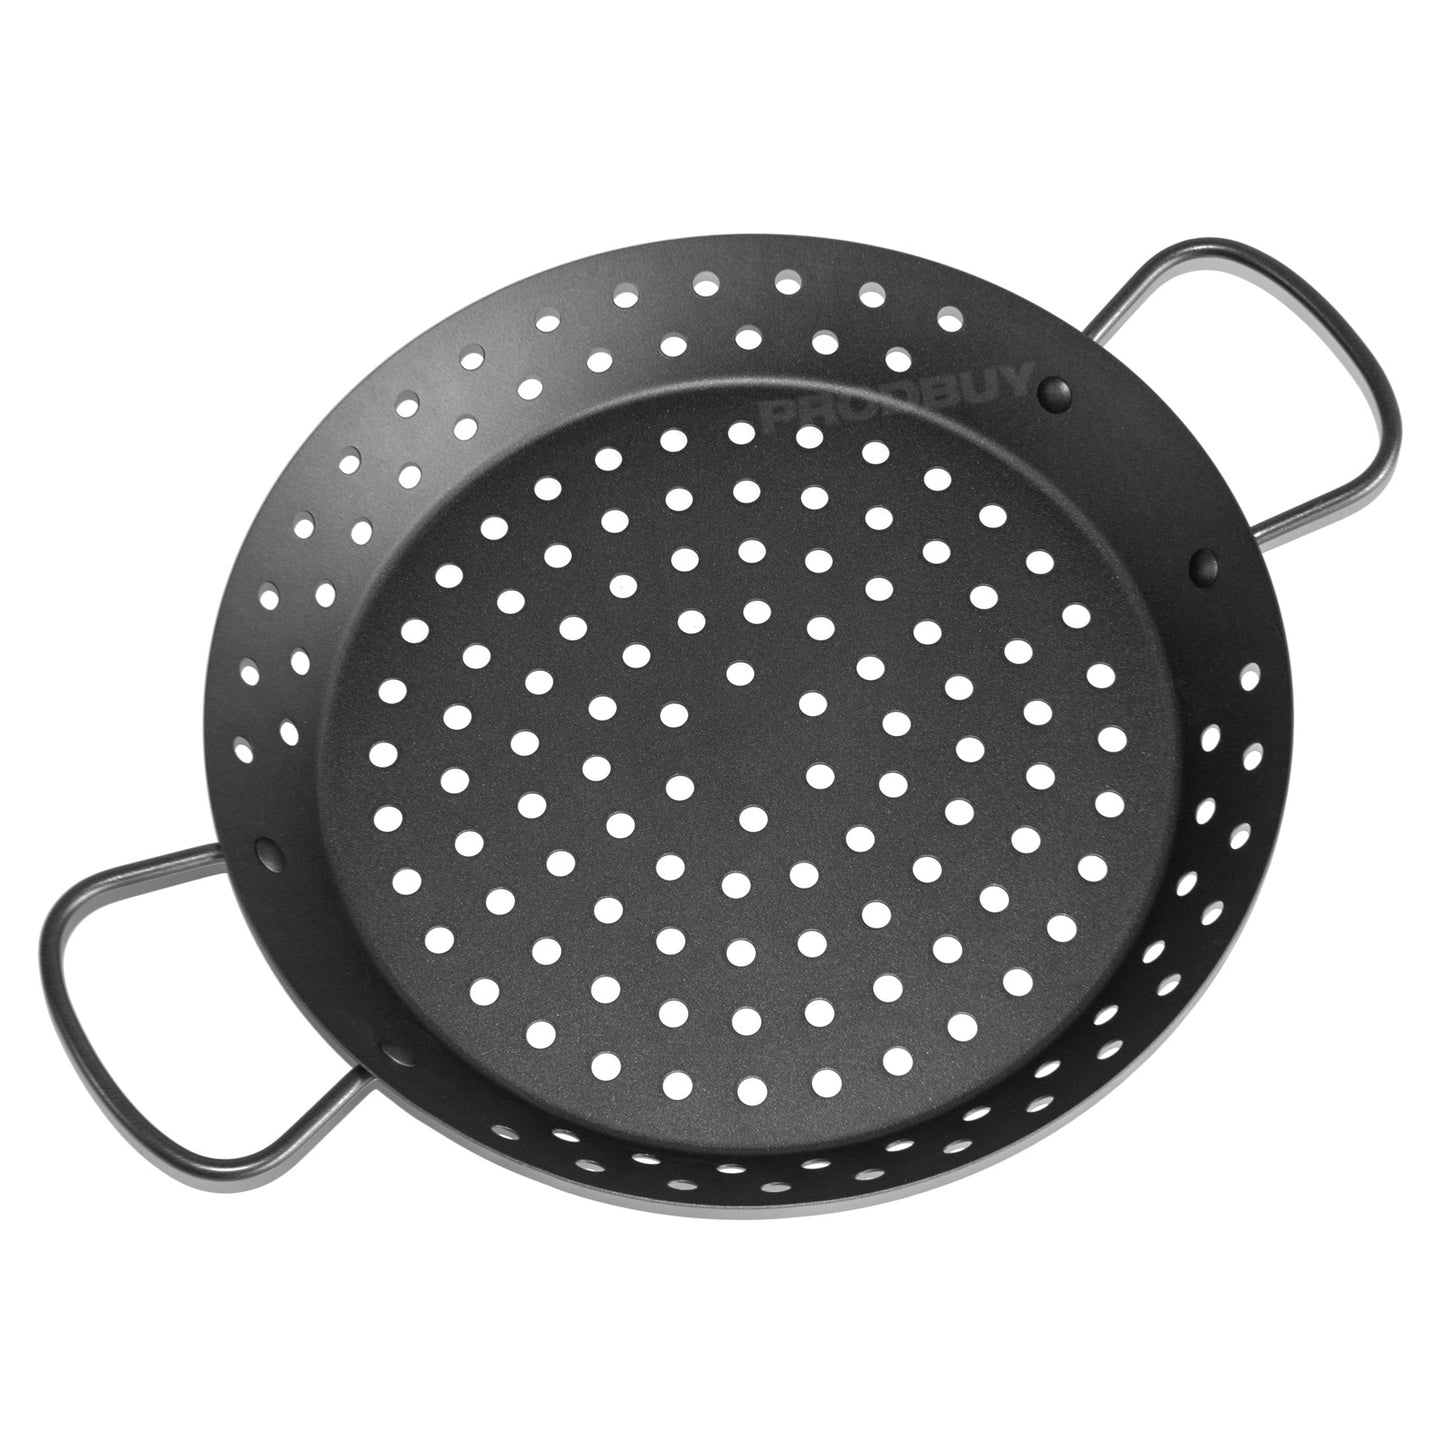 Jamie Oliver 30cm Round Barbecue BBQ Grill Tray Pan Oven Dish Rack Accessories Fish Vegetable